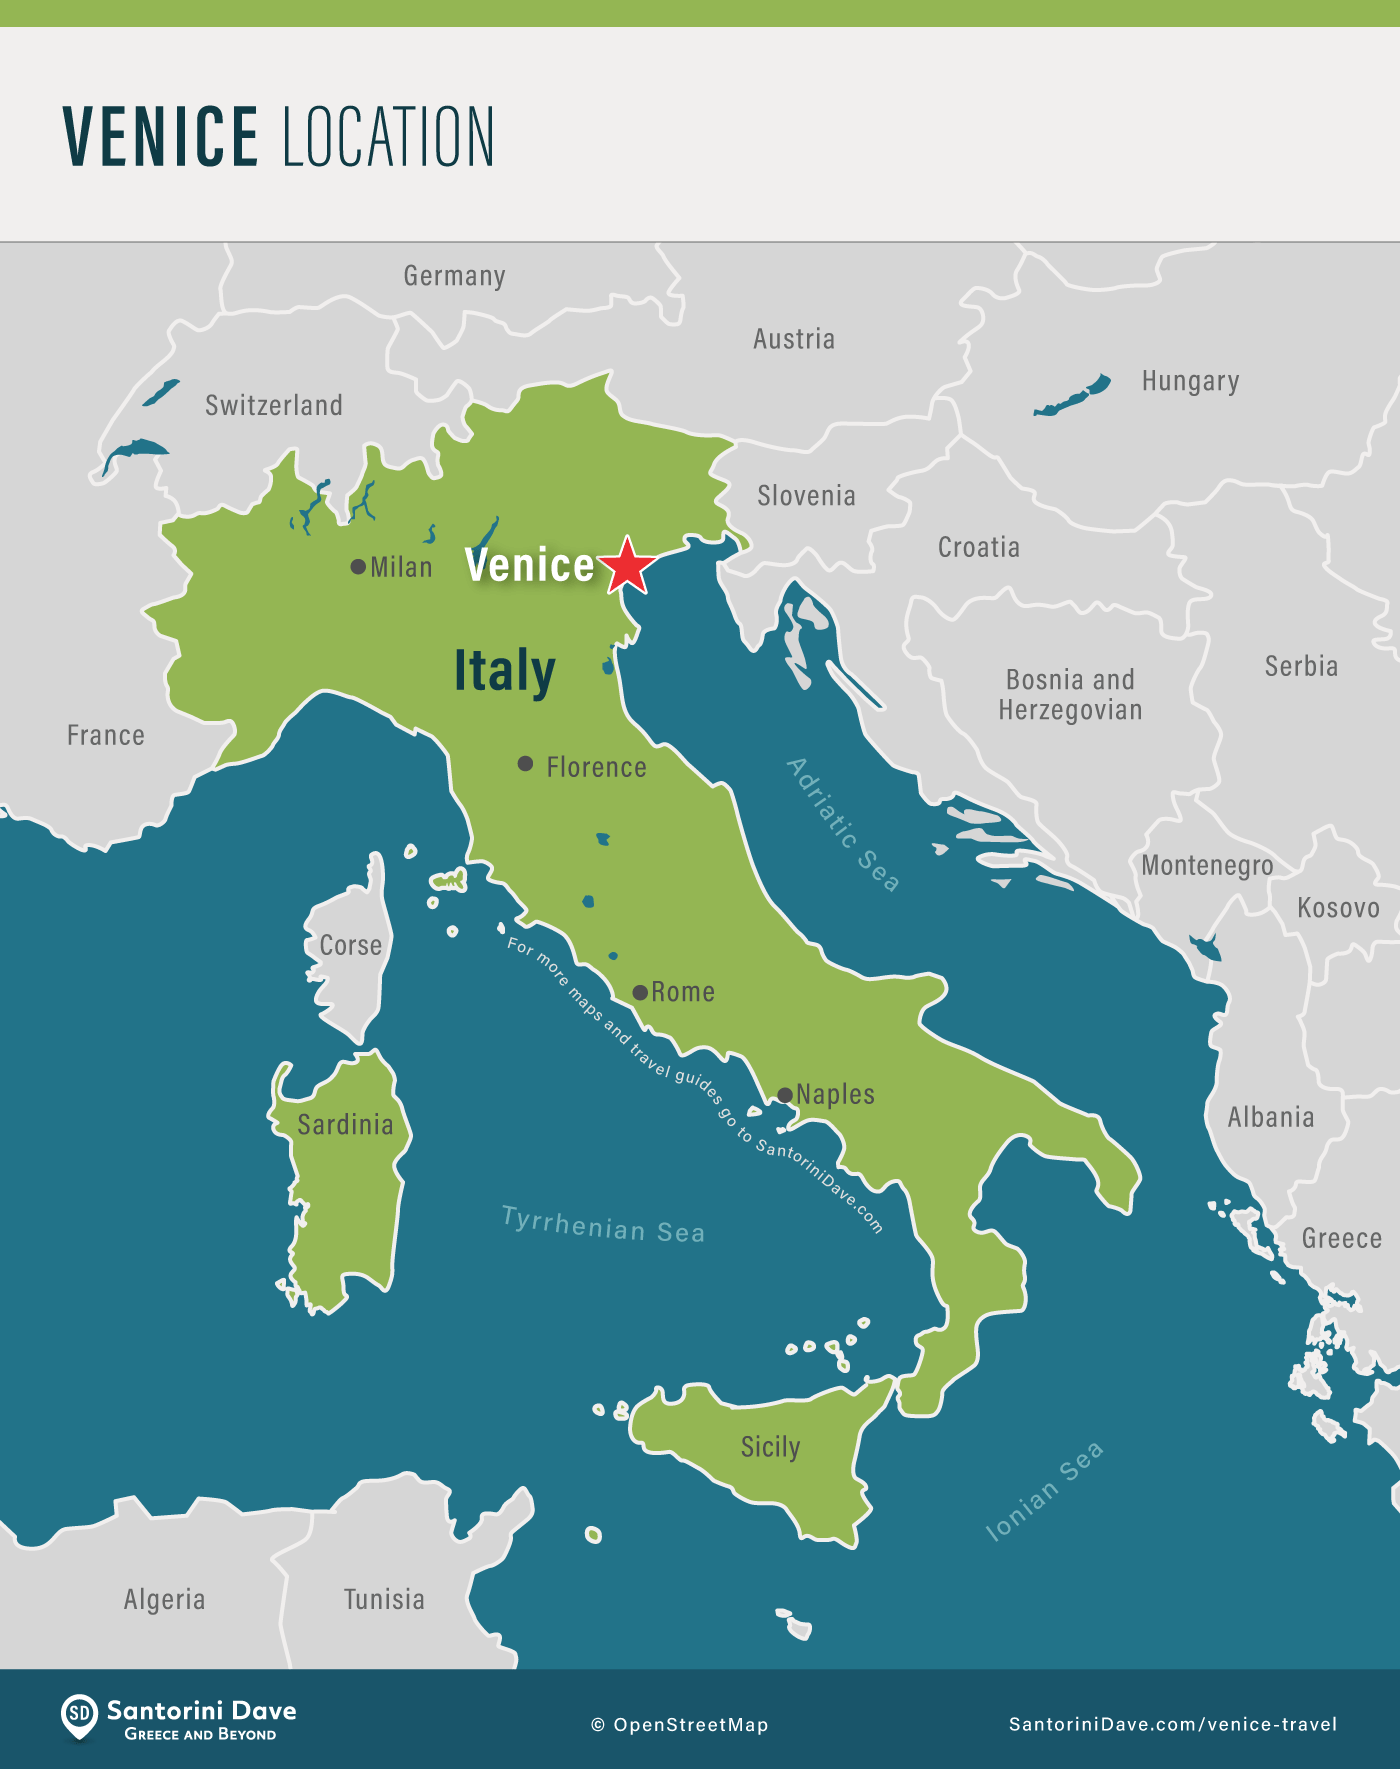 Map showing the location of Venice, Italy